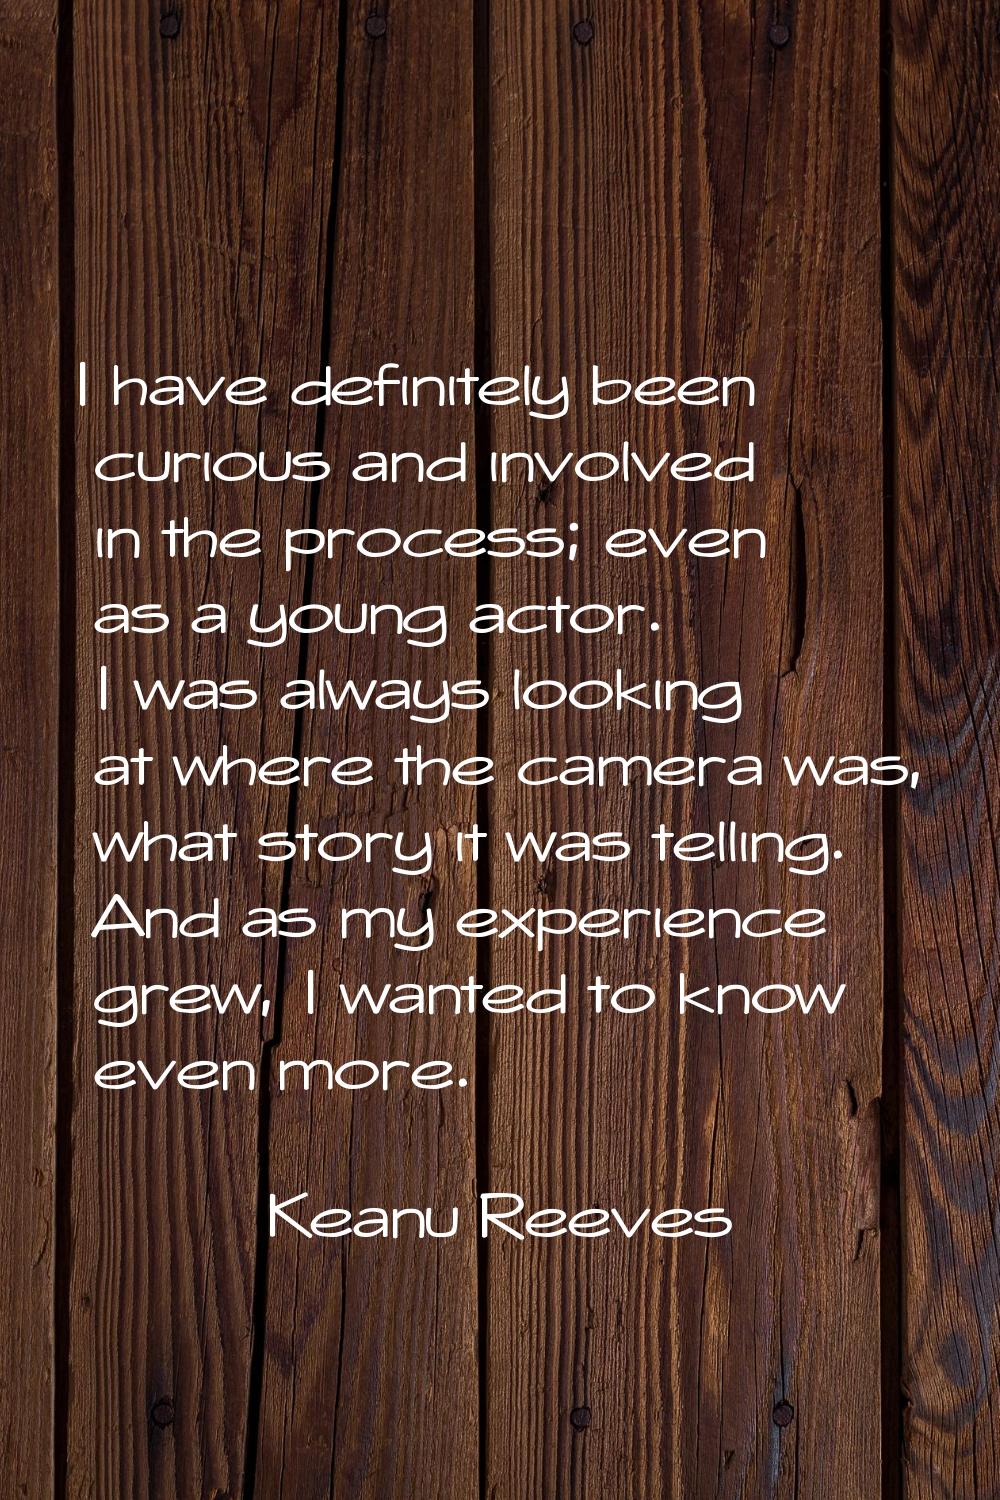 I have definitely been curious and involved in the process; even as a young actor. I was always loo